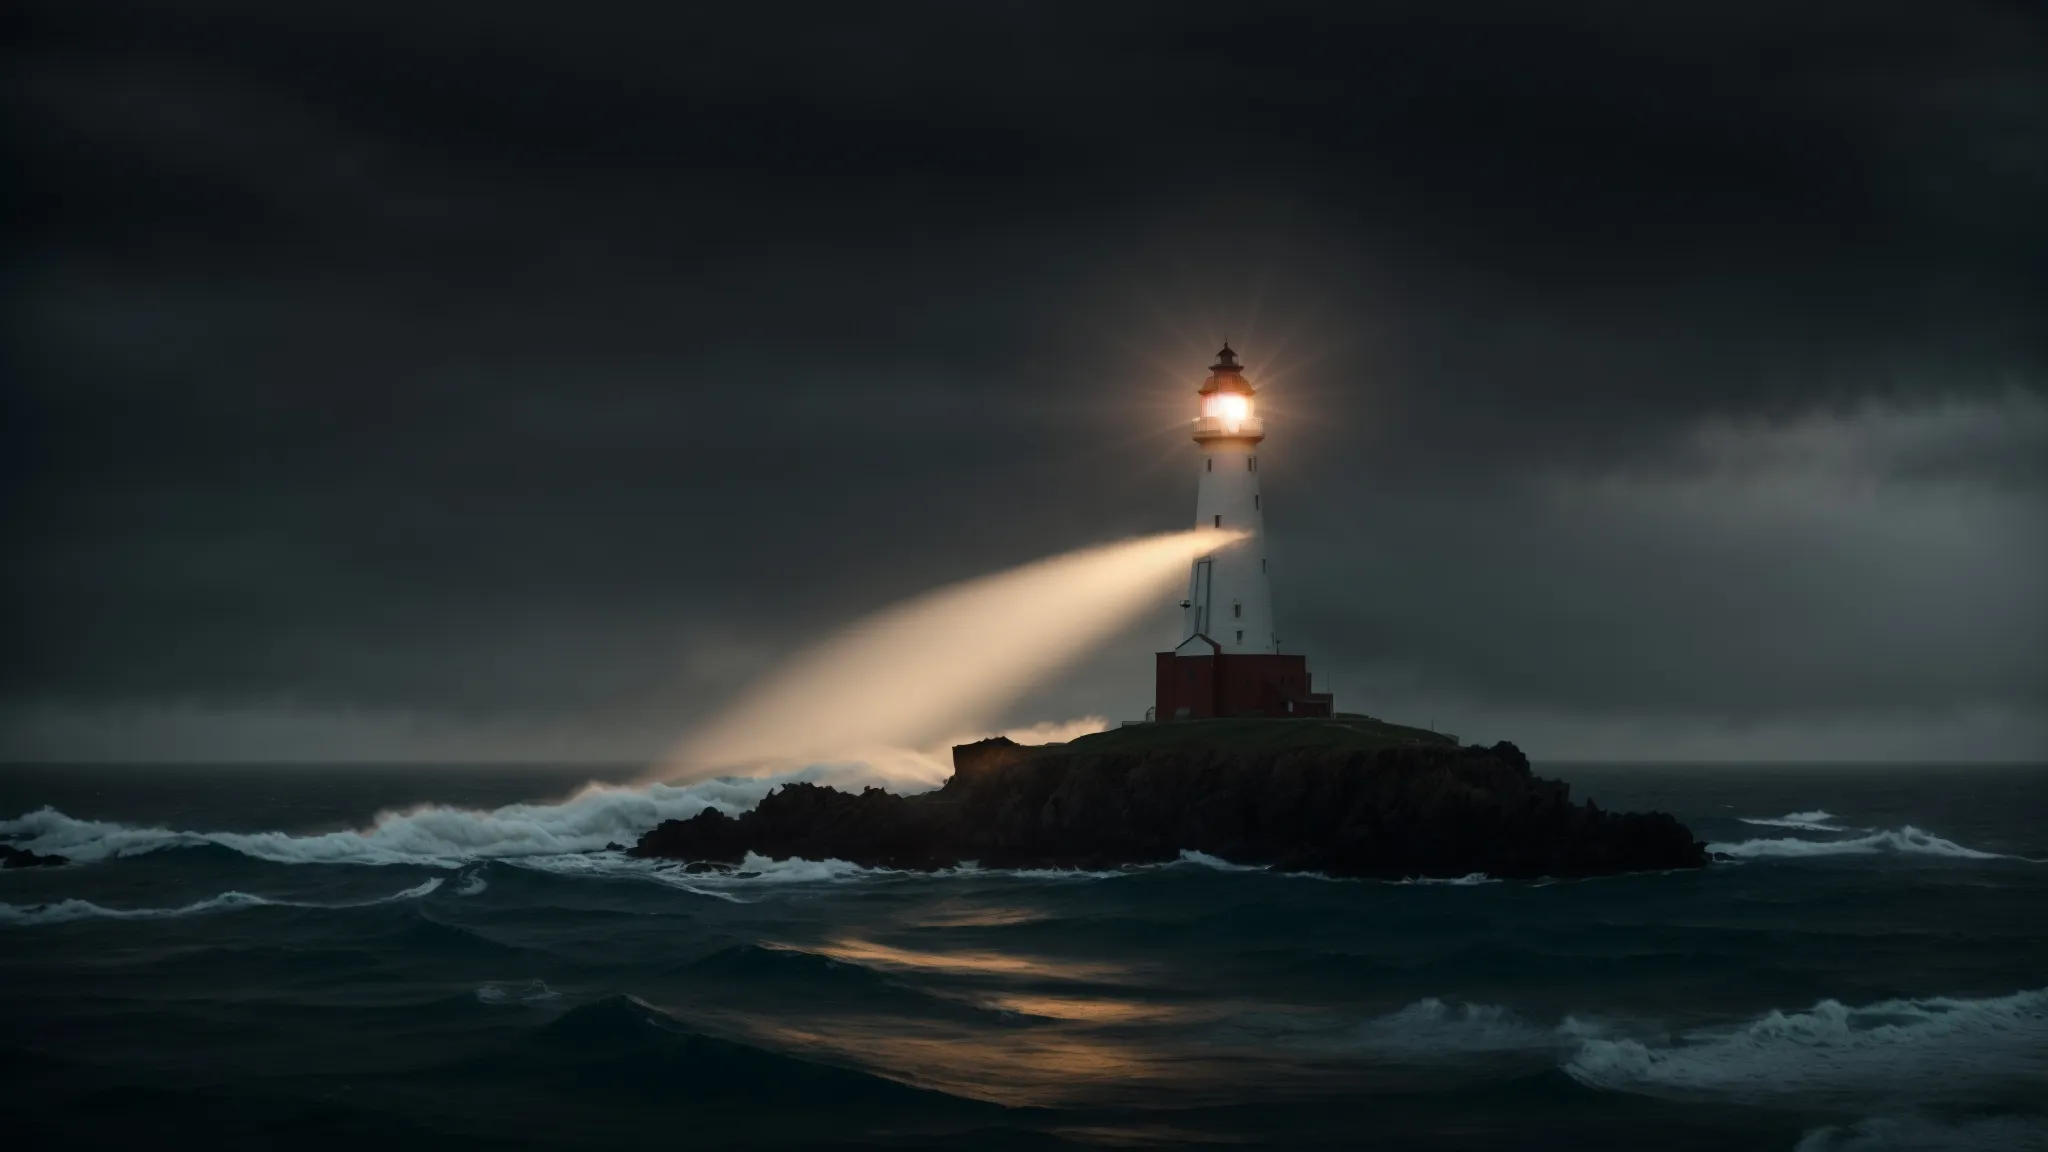 a lighthouse stands firm amidst a vast ocean, casting a guiding light into the surrounding darkness.